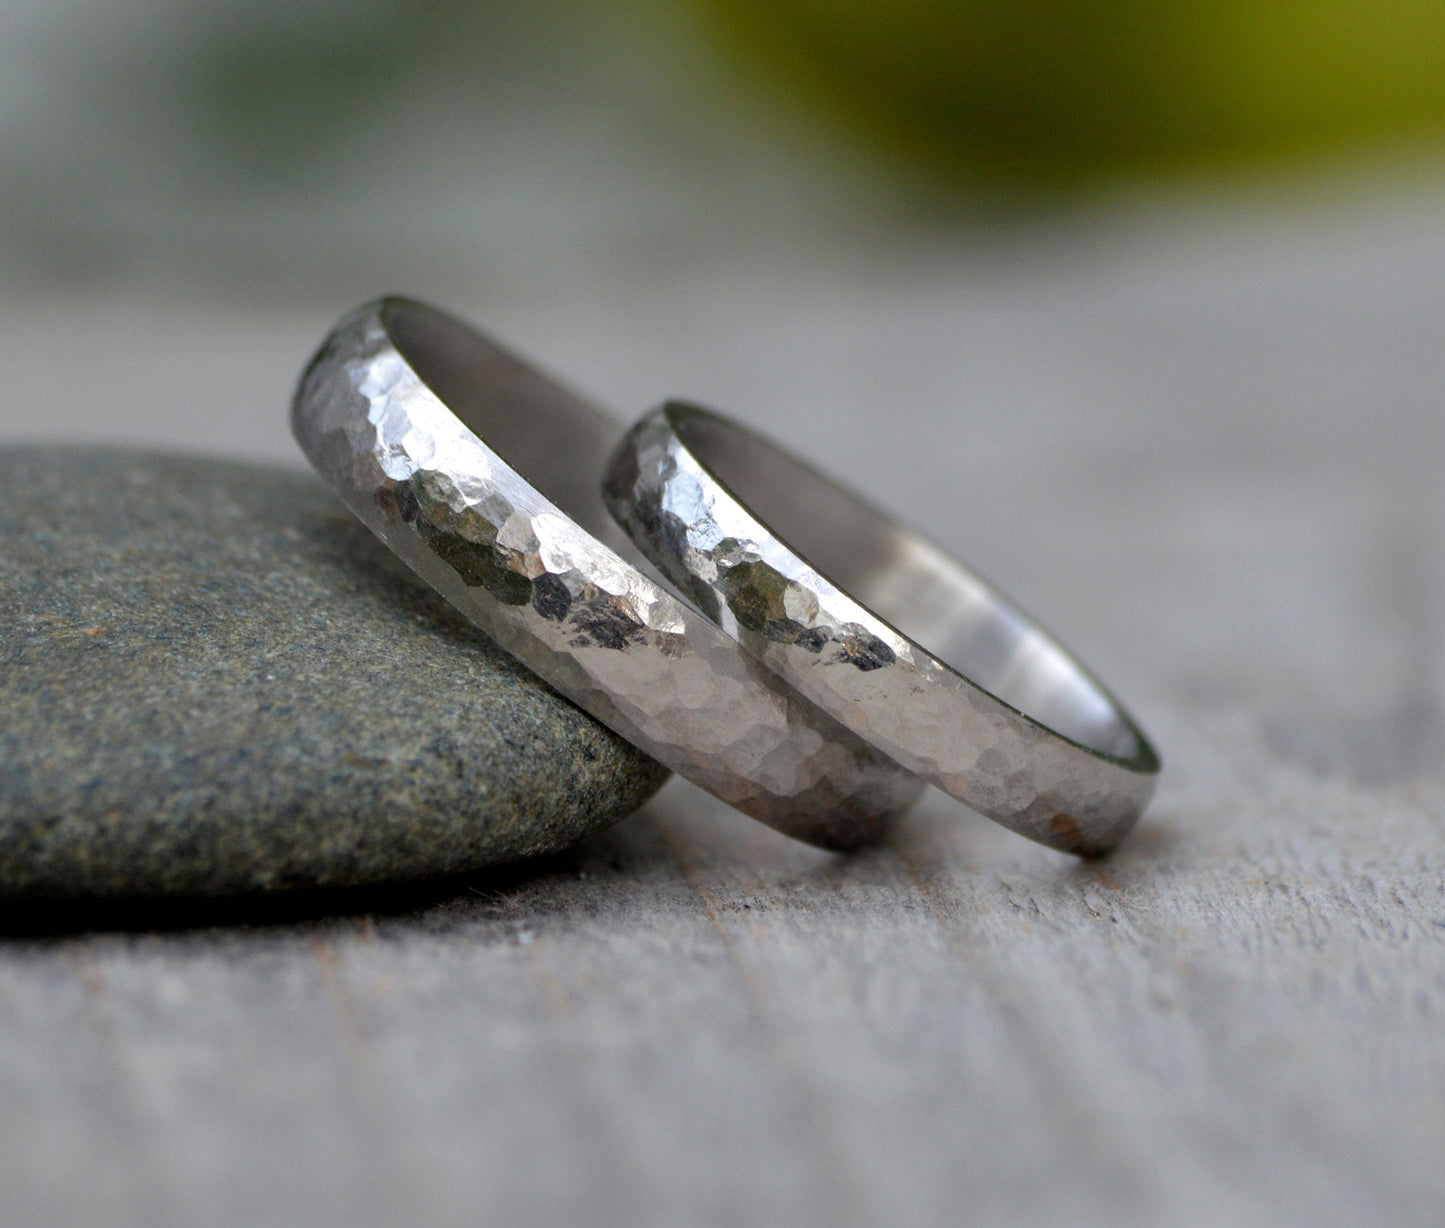 Platinum Wedding Band With Hammered Effect, Platinum Wedding Ring, Rustic Wedding Band, Made To Order